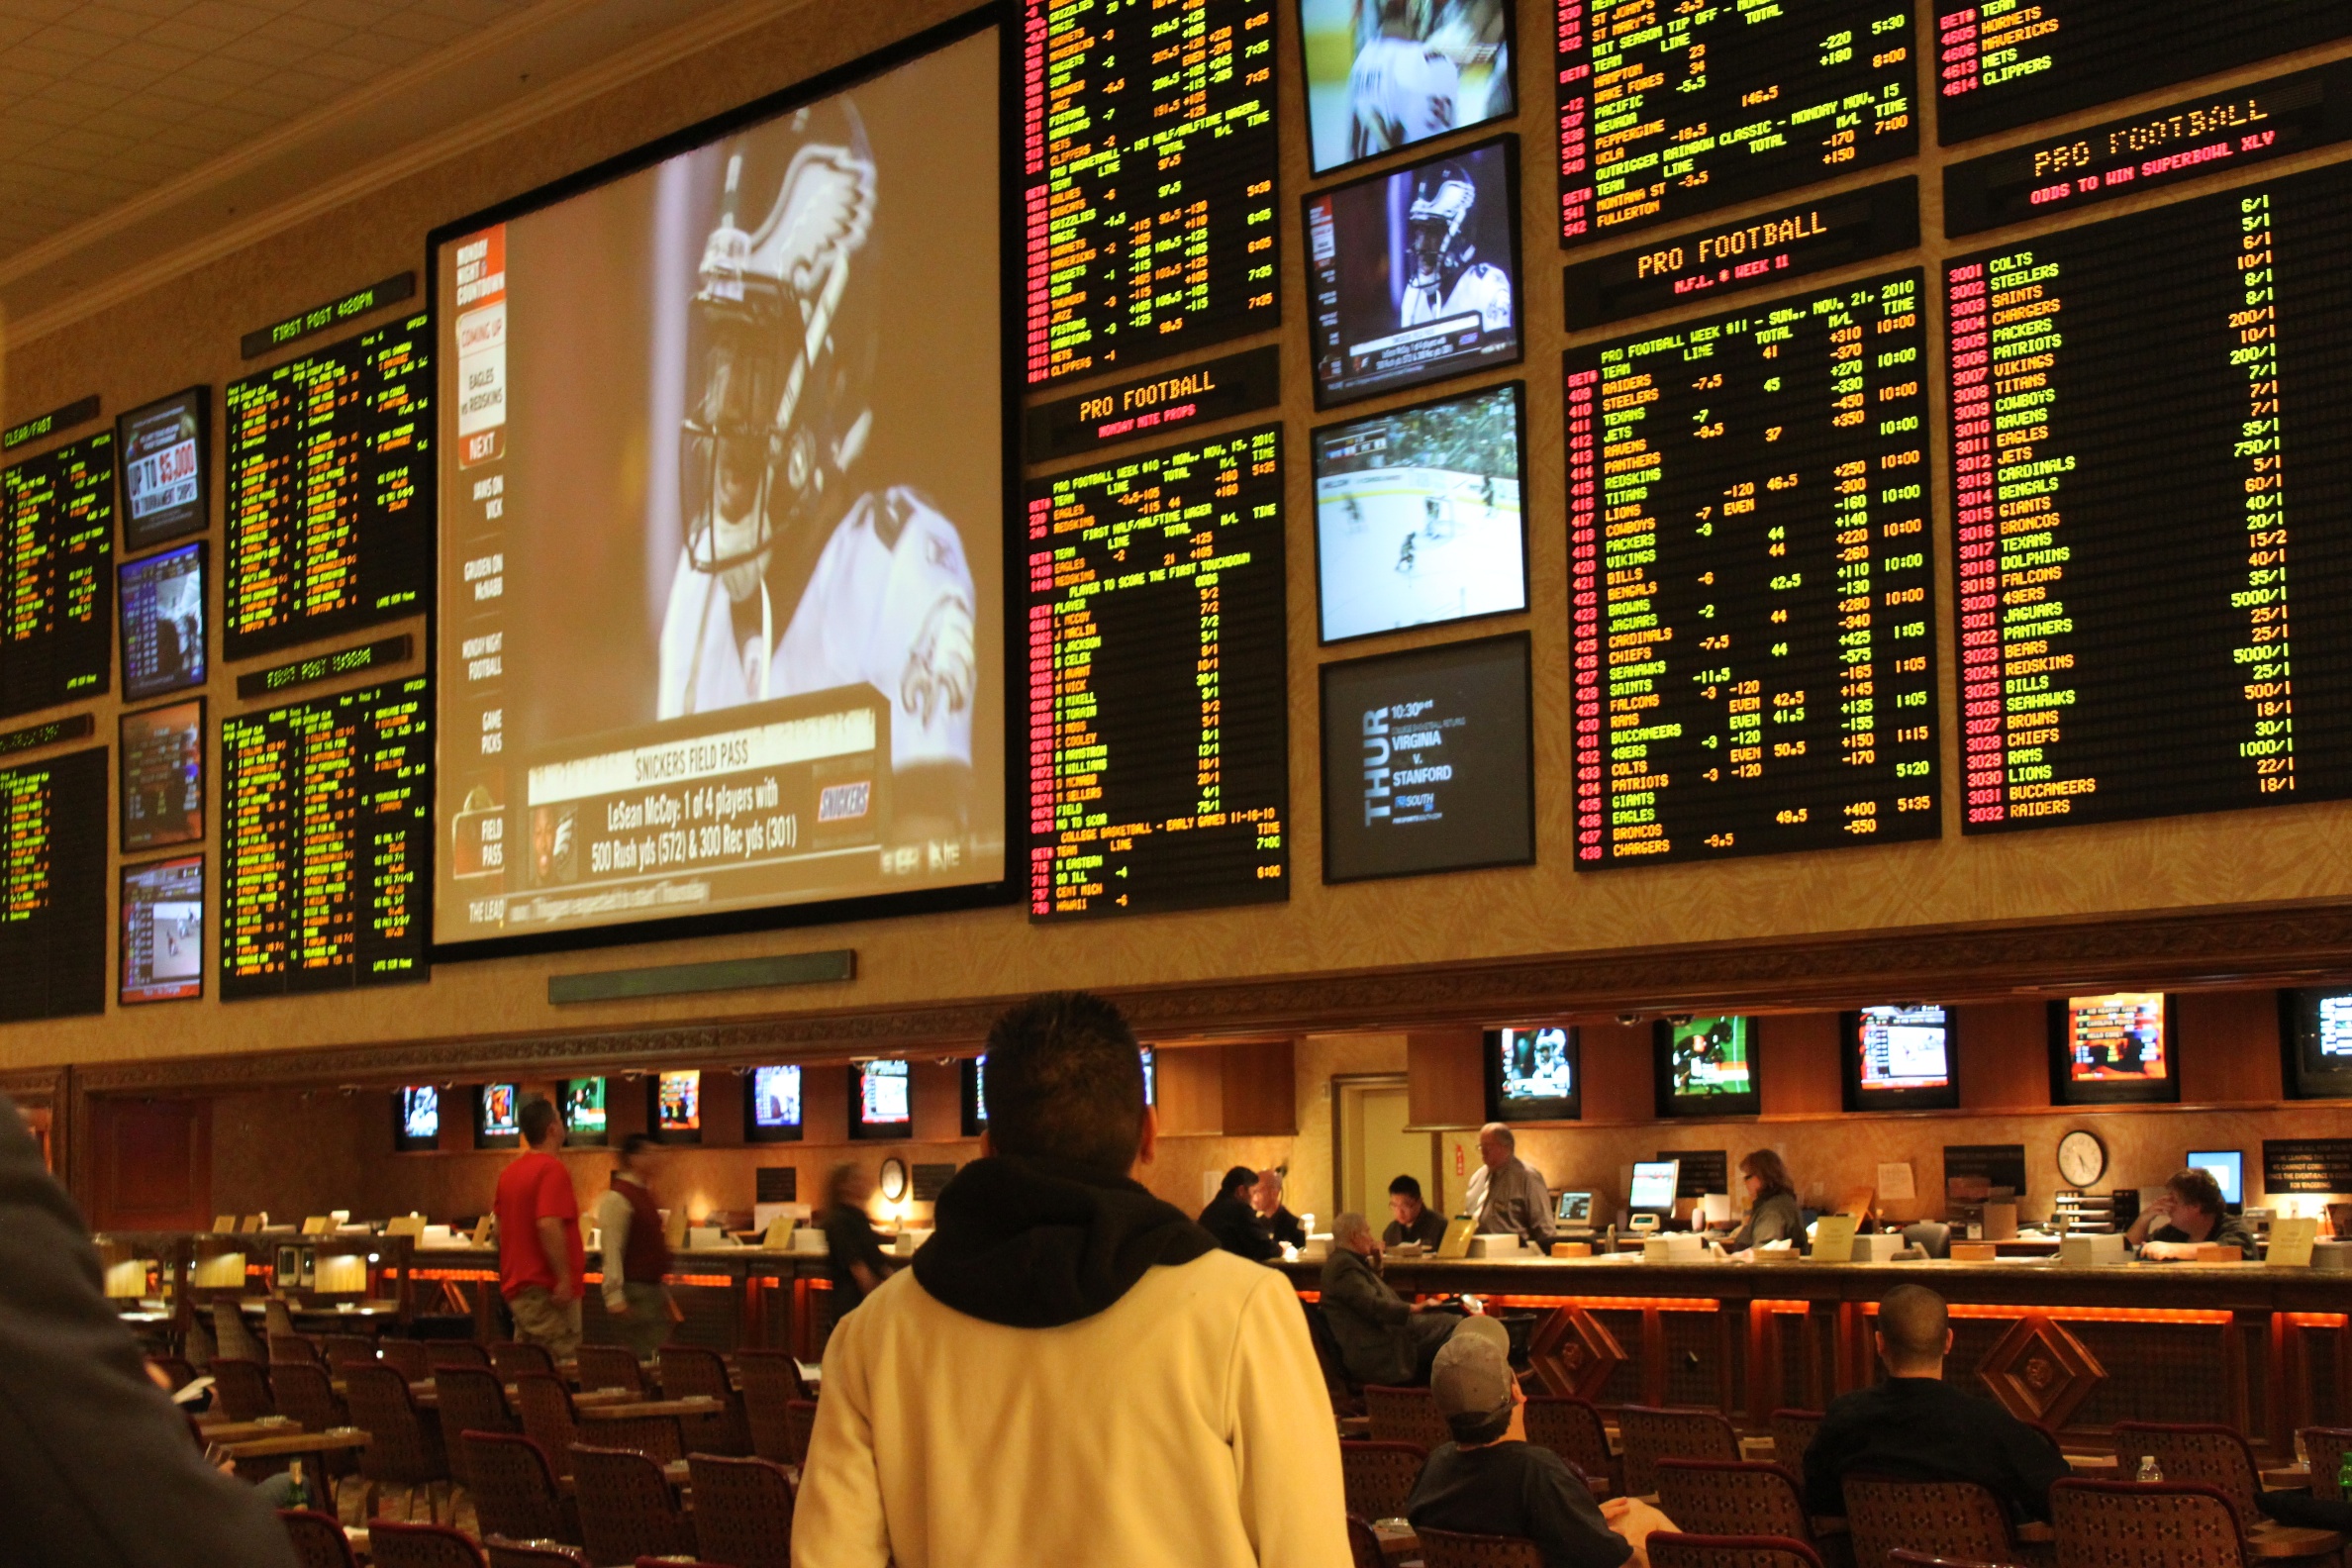 How can you verify the sports betting website you use?